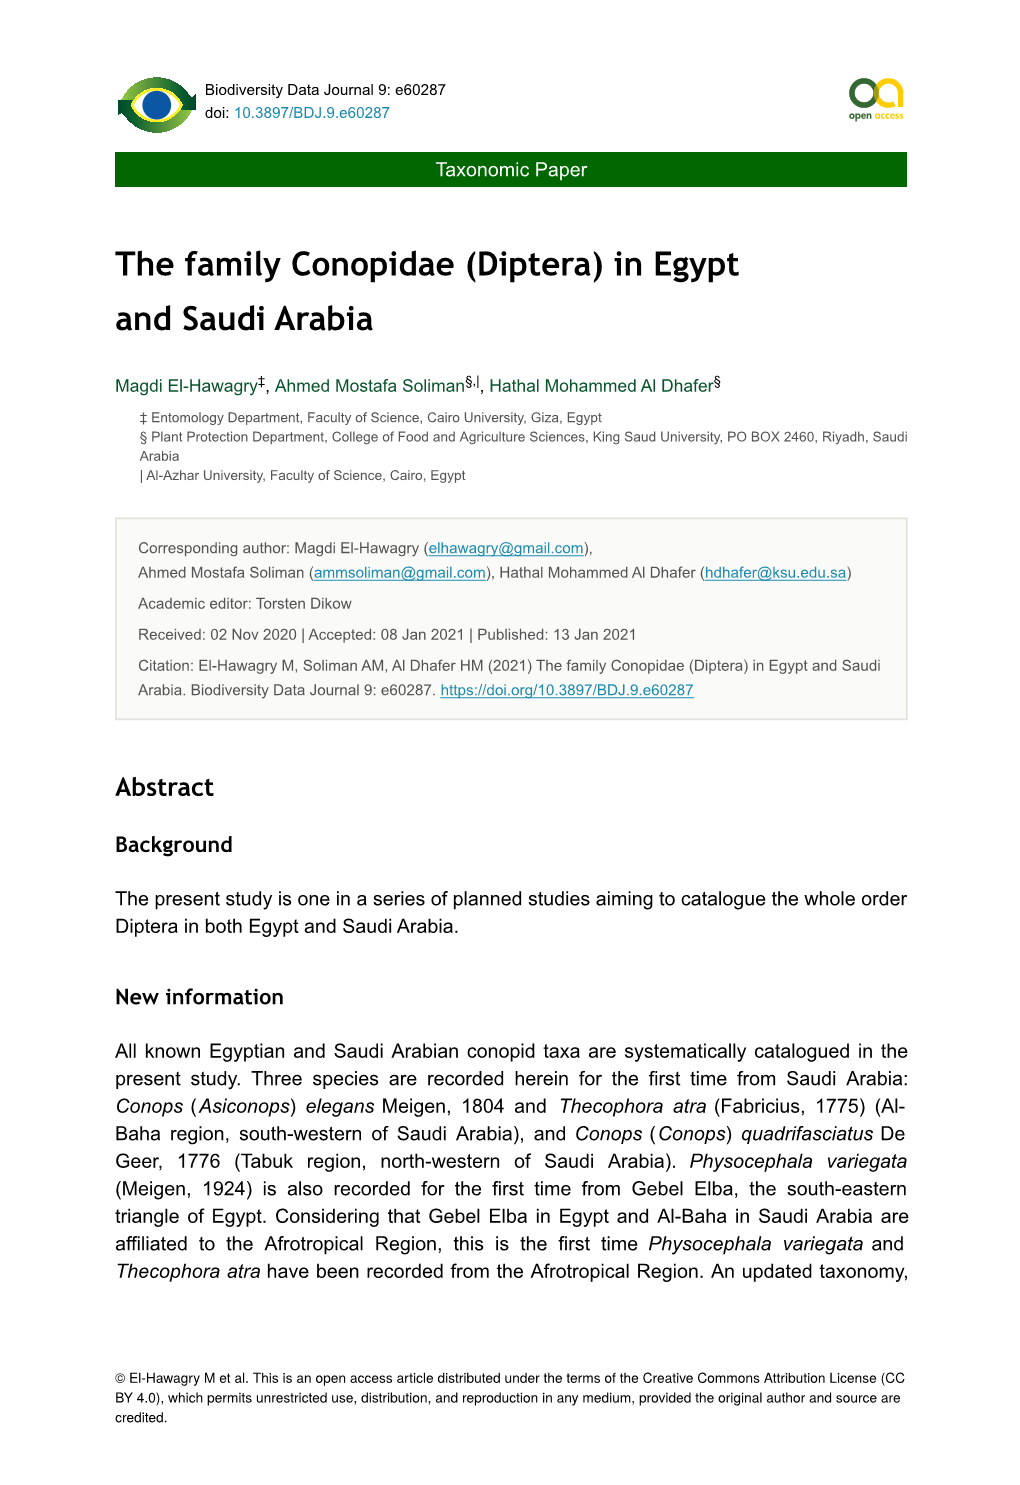 The Family Conopidae (Diptera) in Egypt and Saudi Arabia